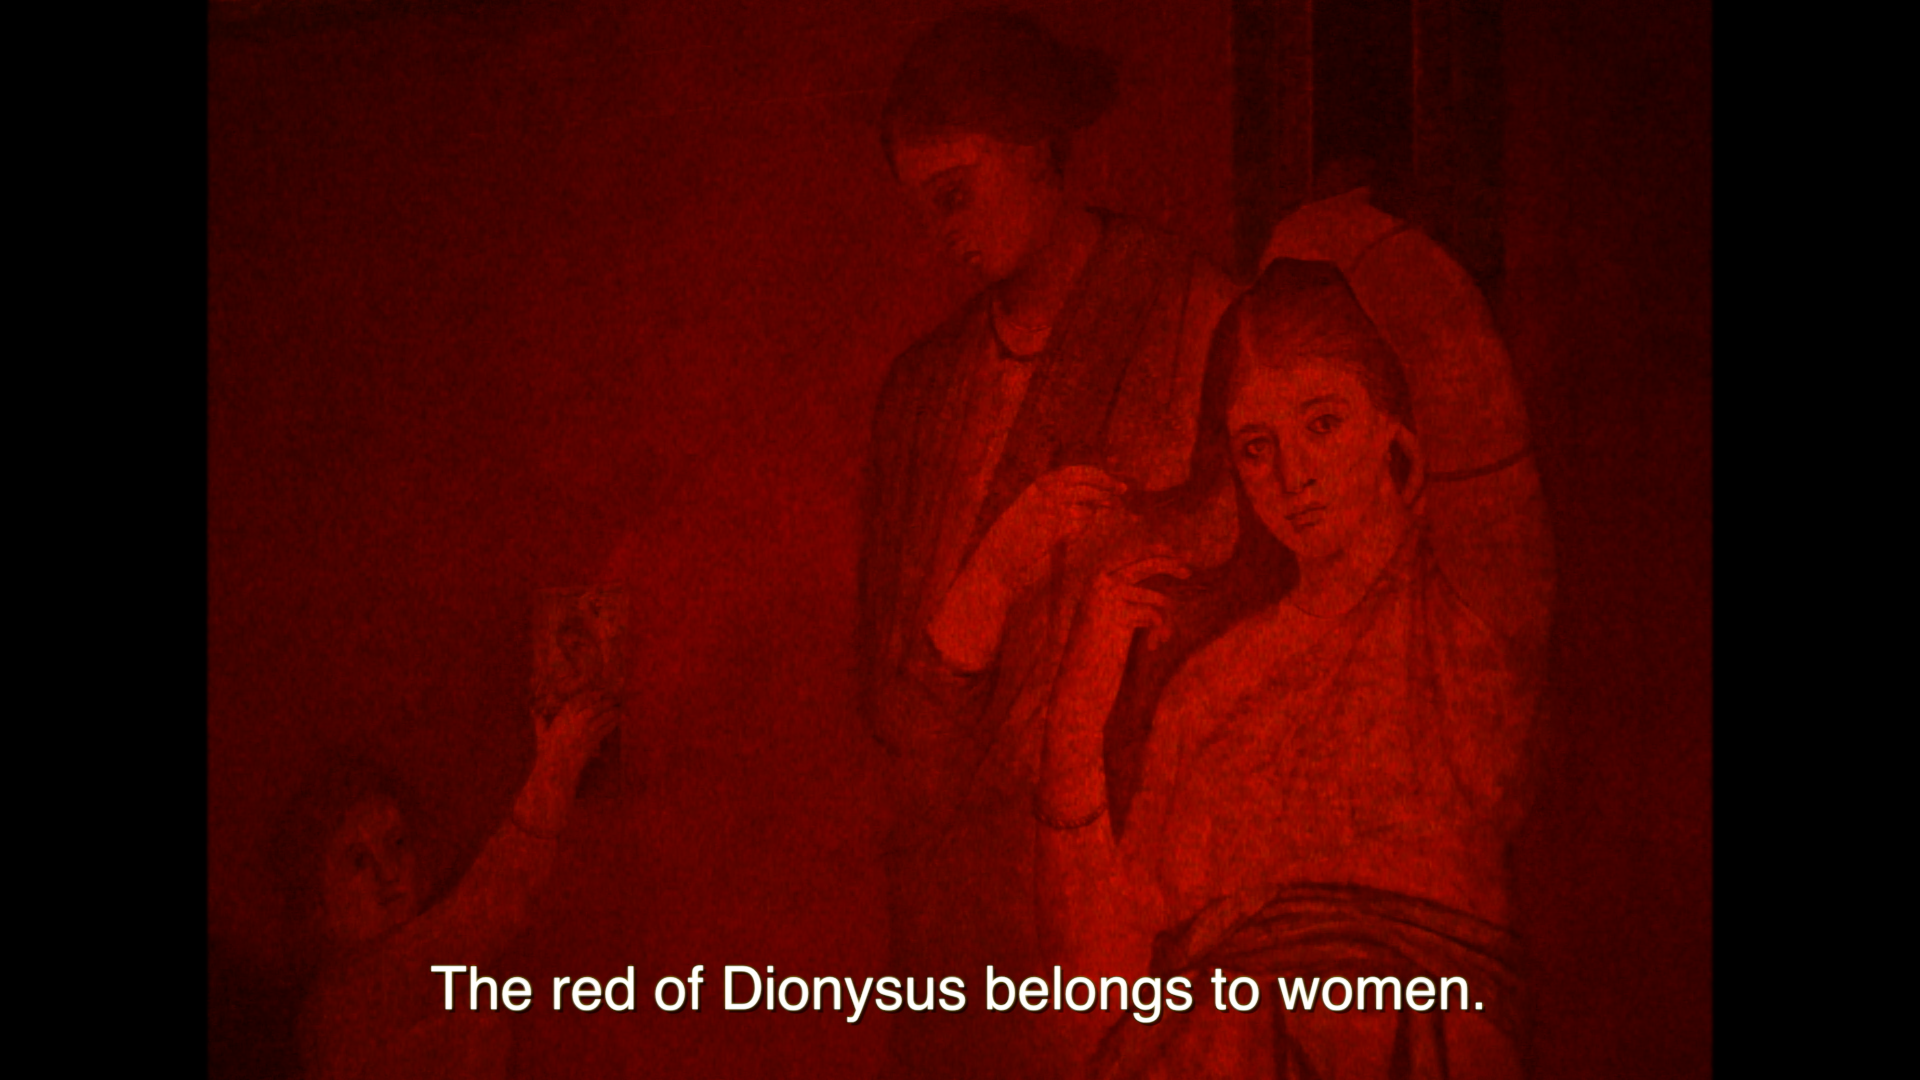 monochromatic image red. Text "The red of Dionysus to women." written at the bottom.